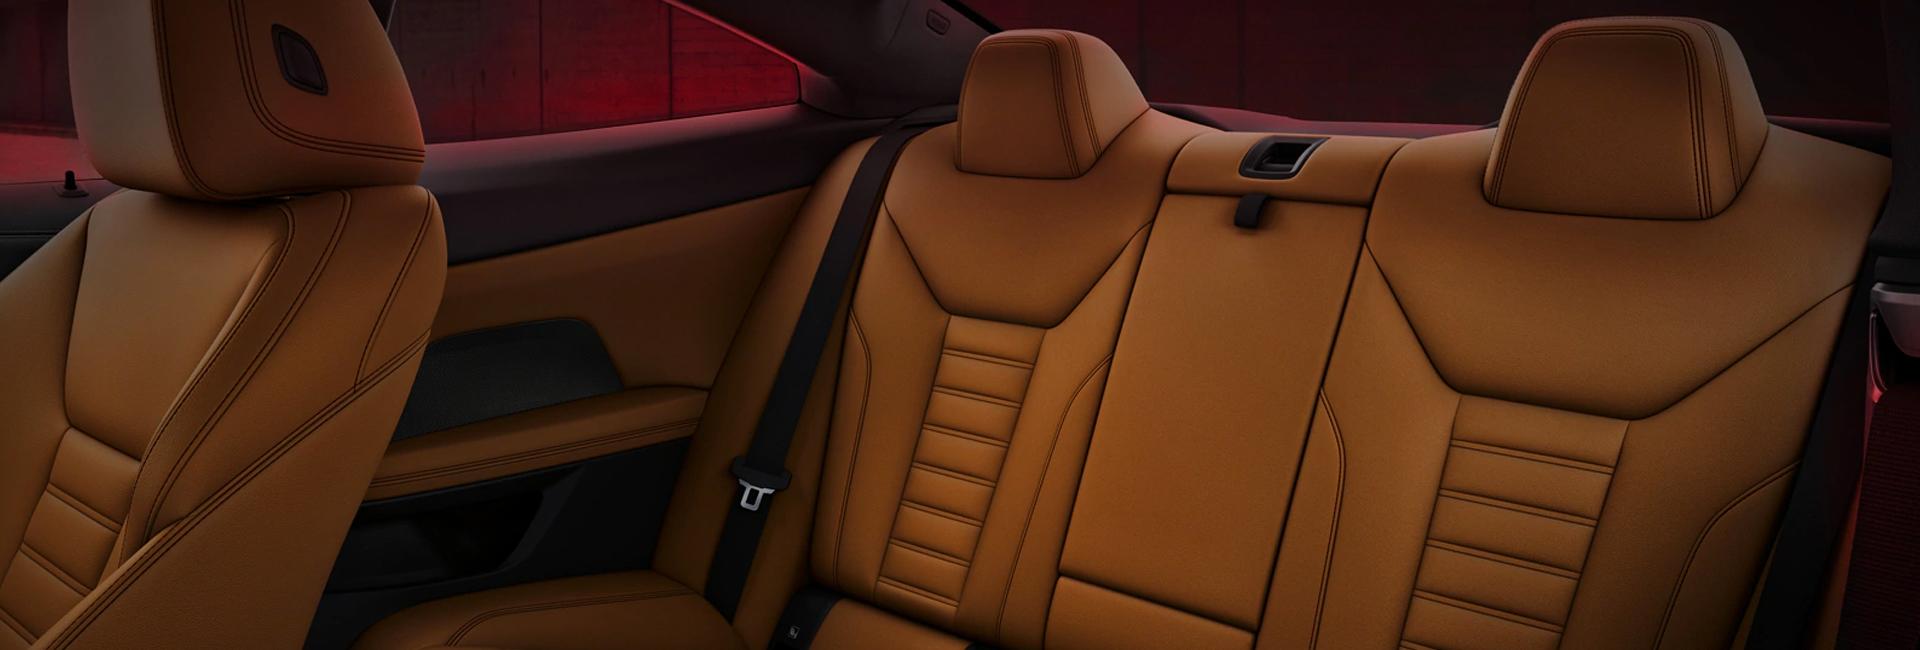 Full interior view of the 2021 4 Series rear seat